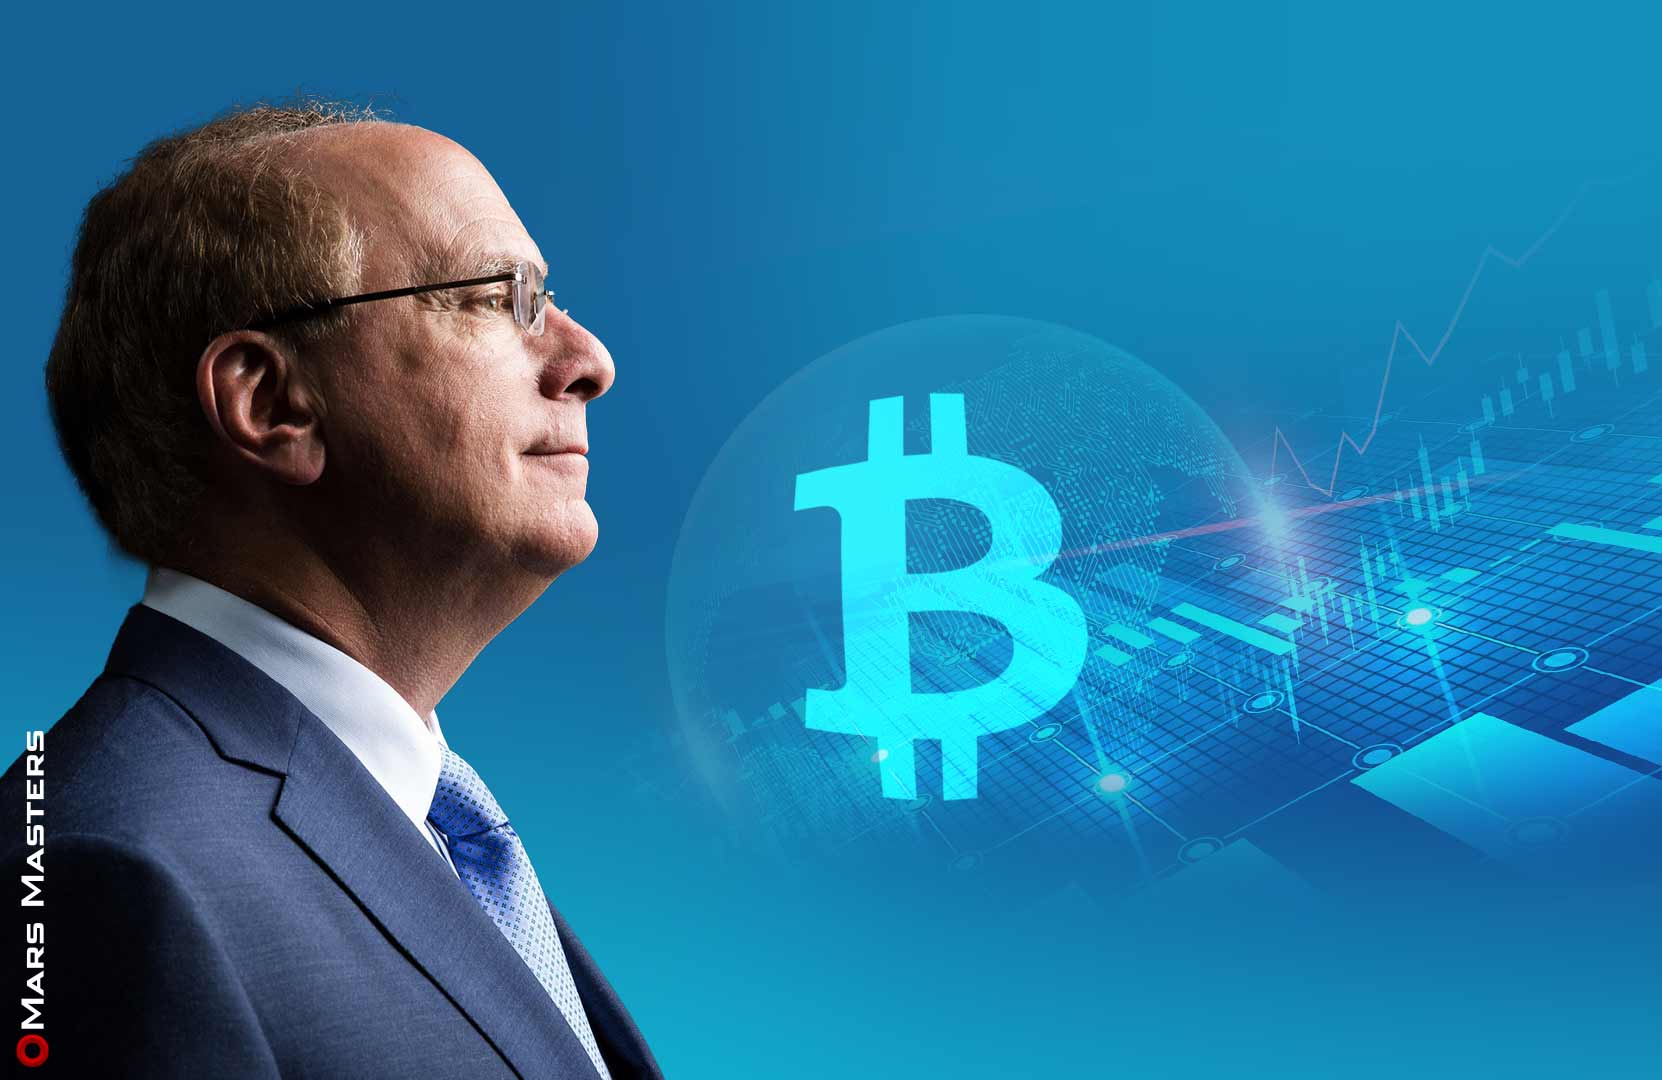 CEO of World’s Largest Asset Manager Says Bitcoin Can Possibly ‘Evolve’ Into Global Asset